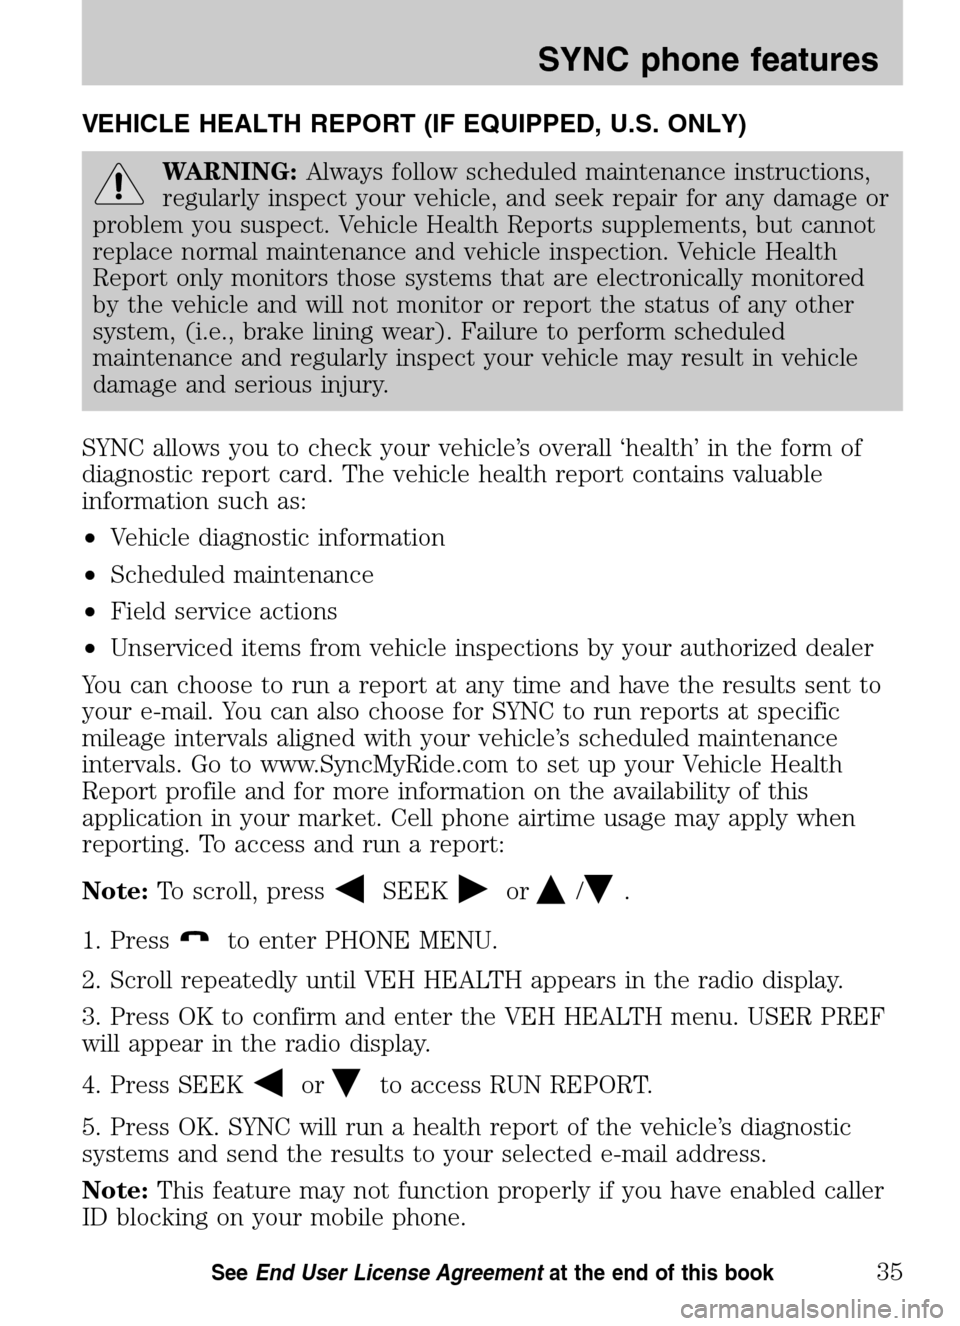 Mercury Sable 2009  SYNC Supplement  VEHICLE HEALTH REPORT (IF EQUIPPED, U.S. ONLY)
WARNING:Always follow scheduled maintenance instructions, 
regularly inspect your vehicle, and seek repair for any damage or
problem you suspect. Vehicle